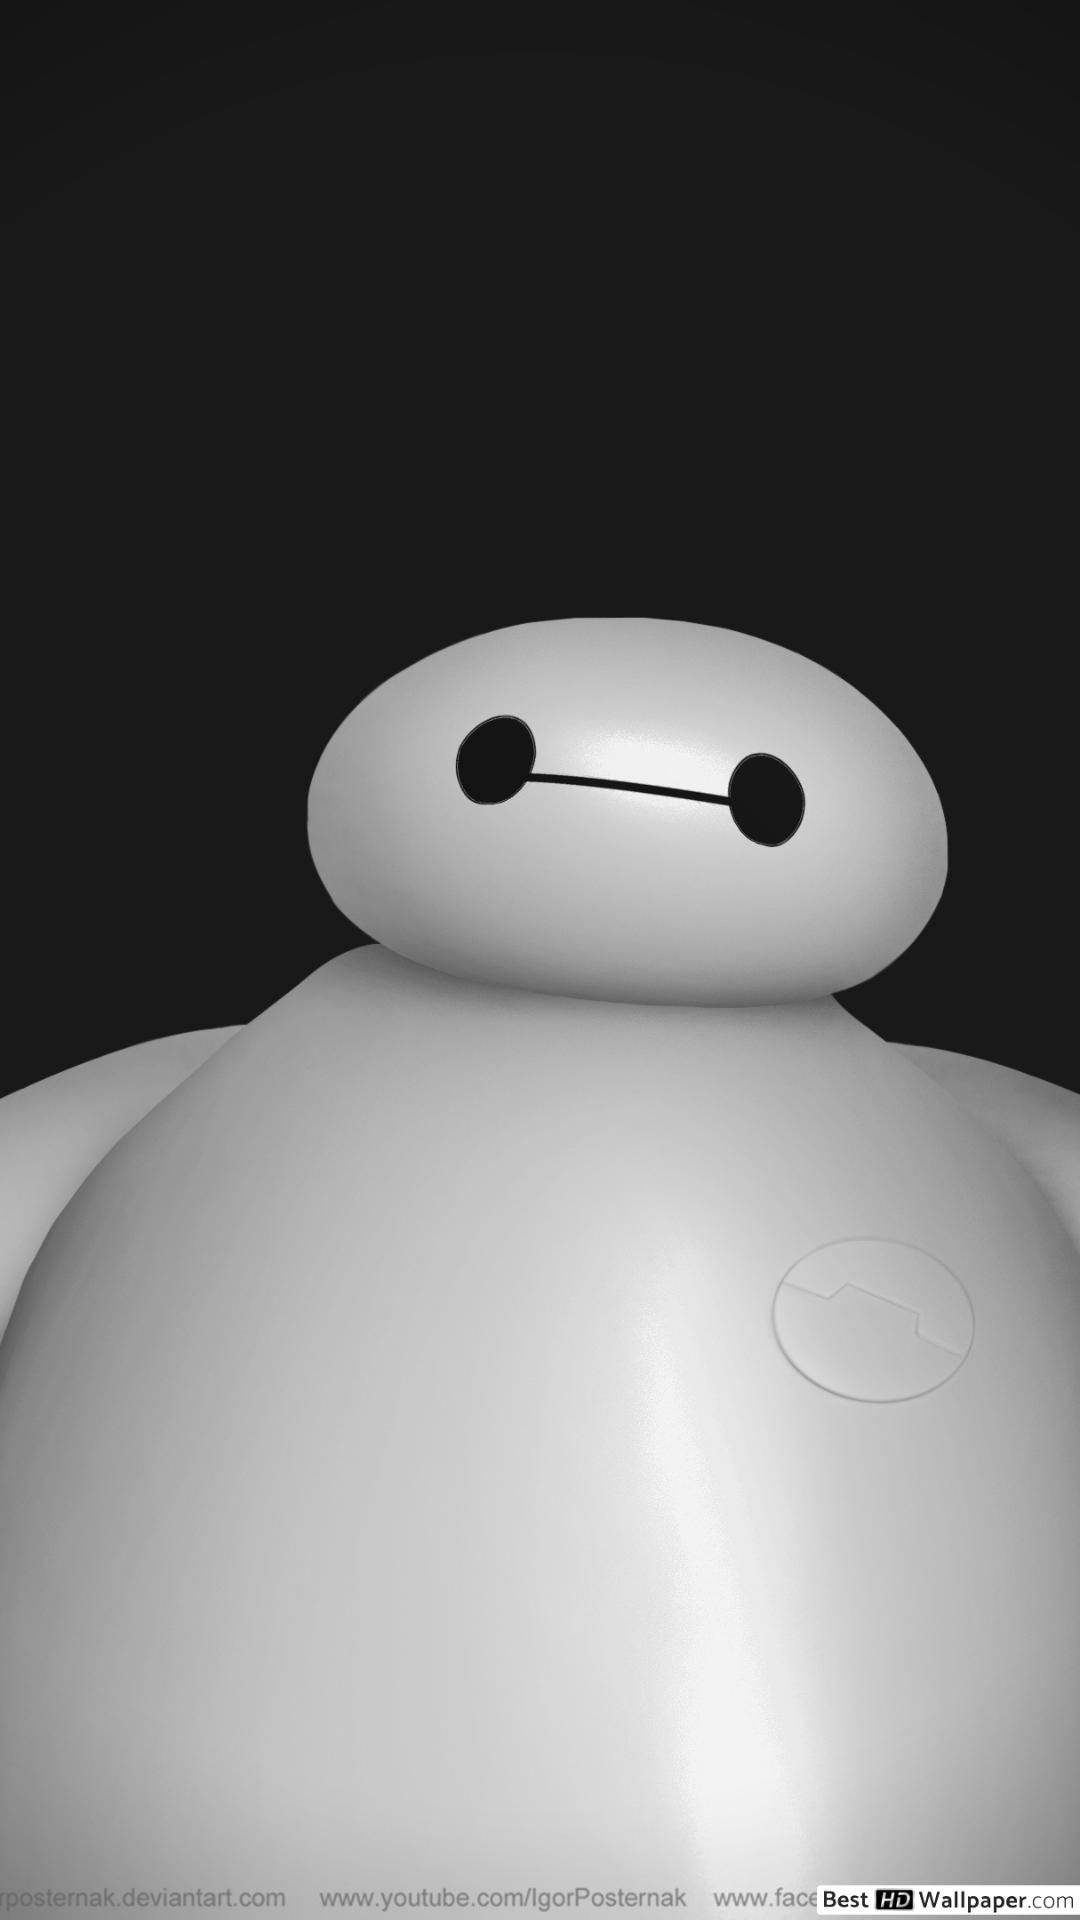 baymax wallpaper iphone,snowman,black and white,light fixture,lamp,still life photography